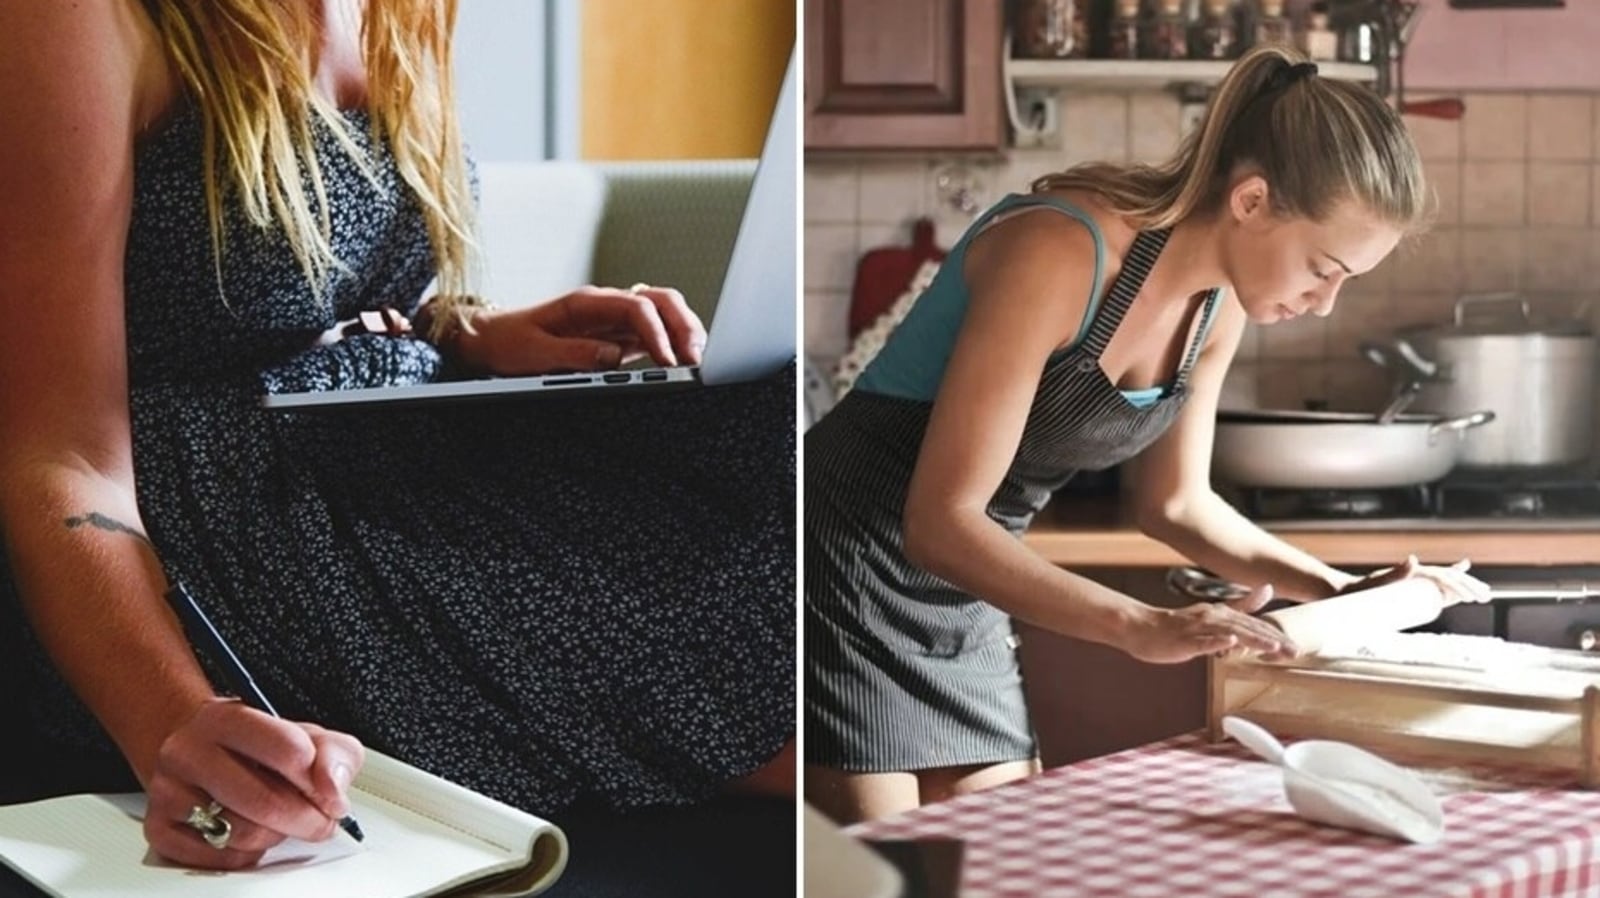 Working woman vs housewife; is one more stressed than the other? Experts answer Health pic